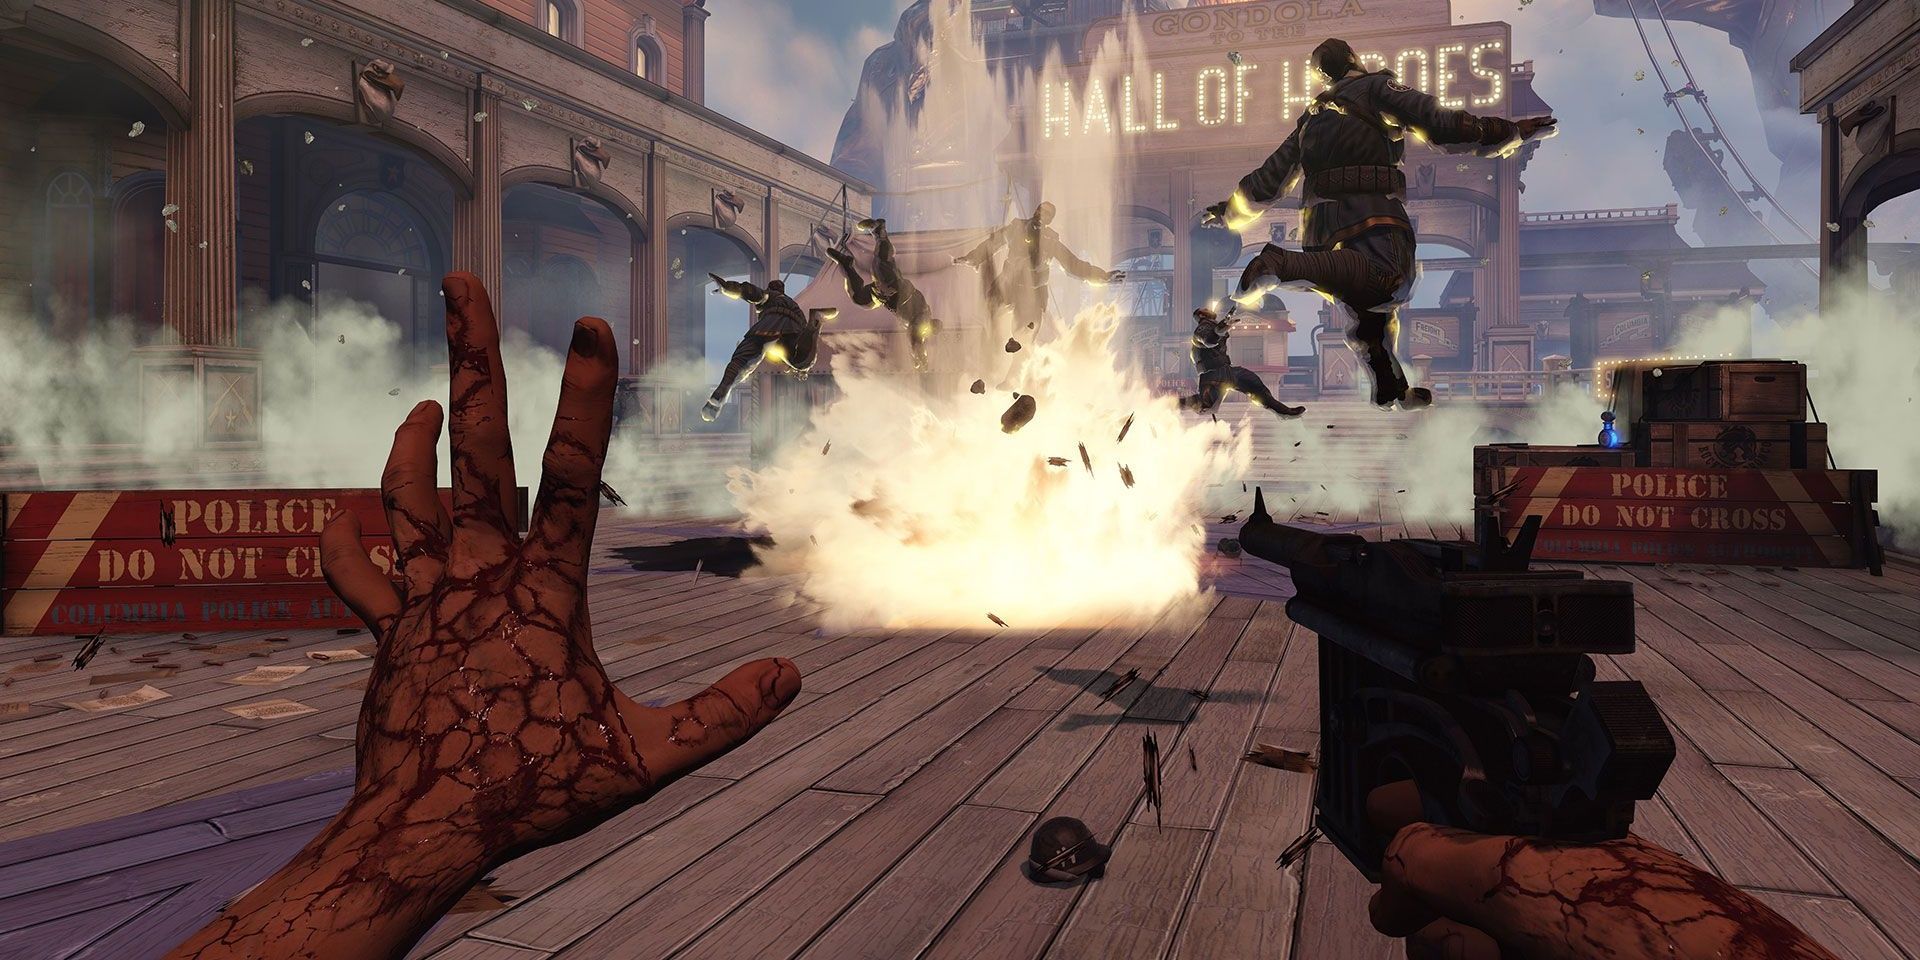 Booker using a Vigor ability on a group of Columbia soldiers near the Hall of Heroes in BioShock Infinite.